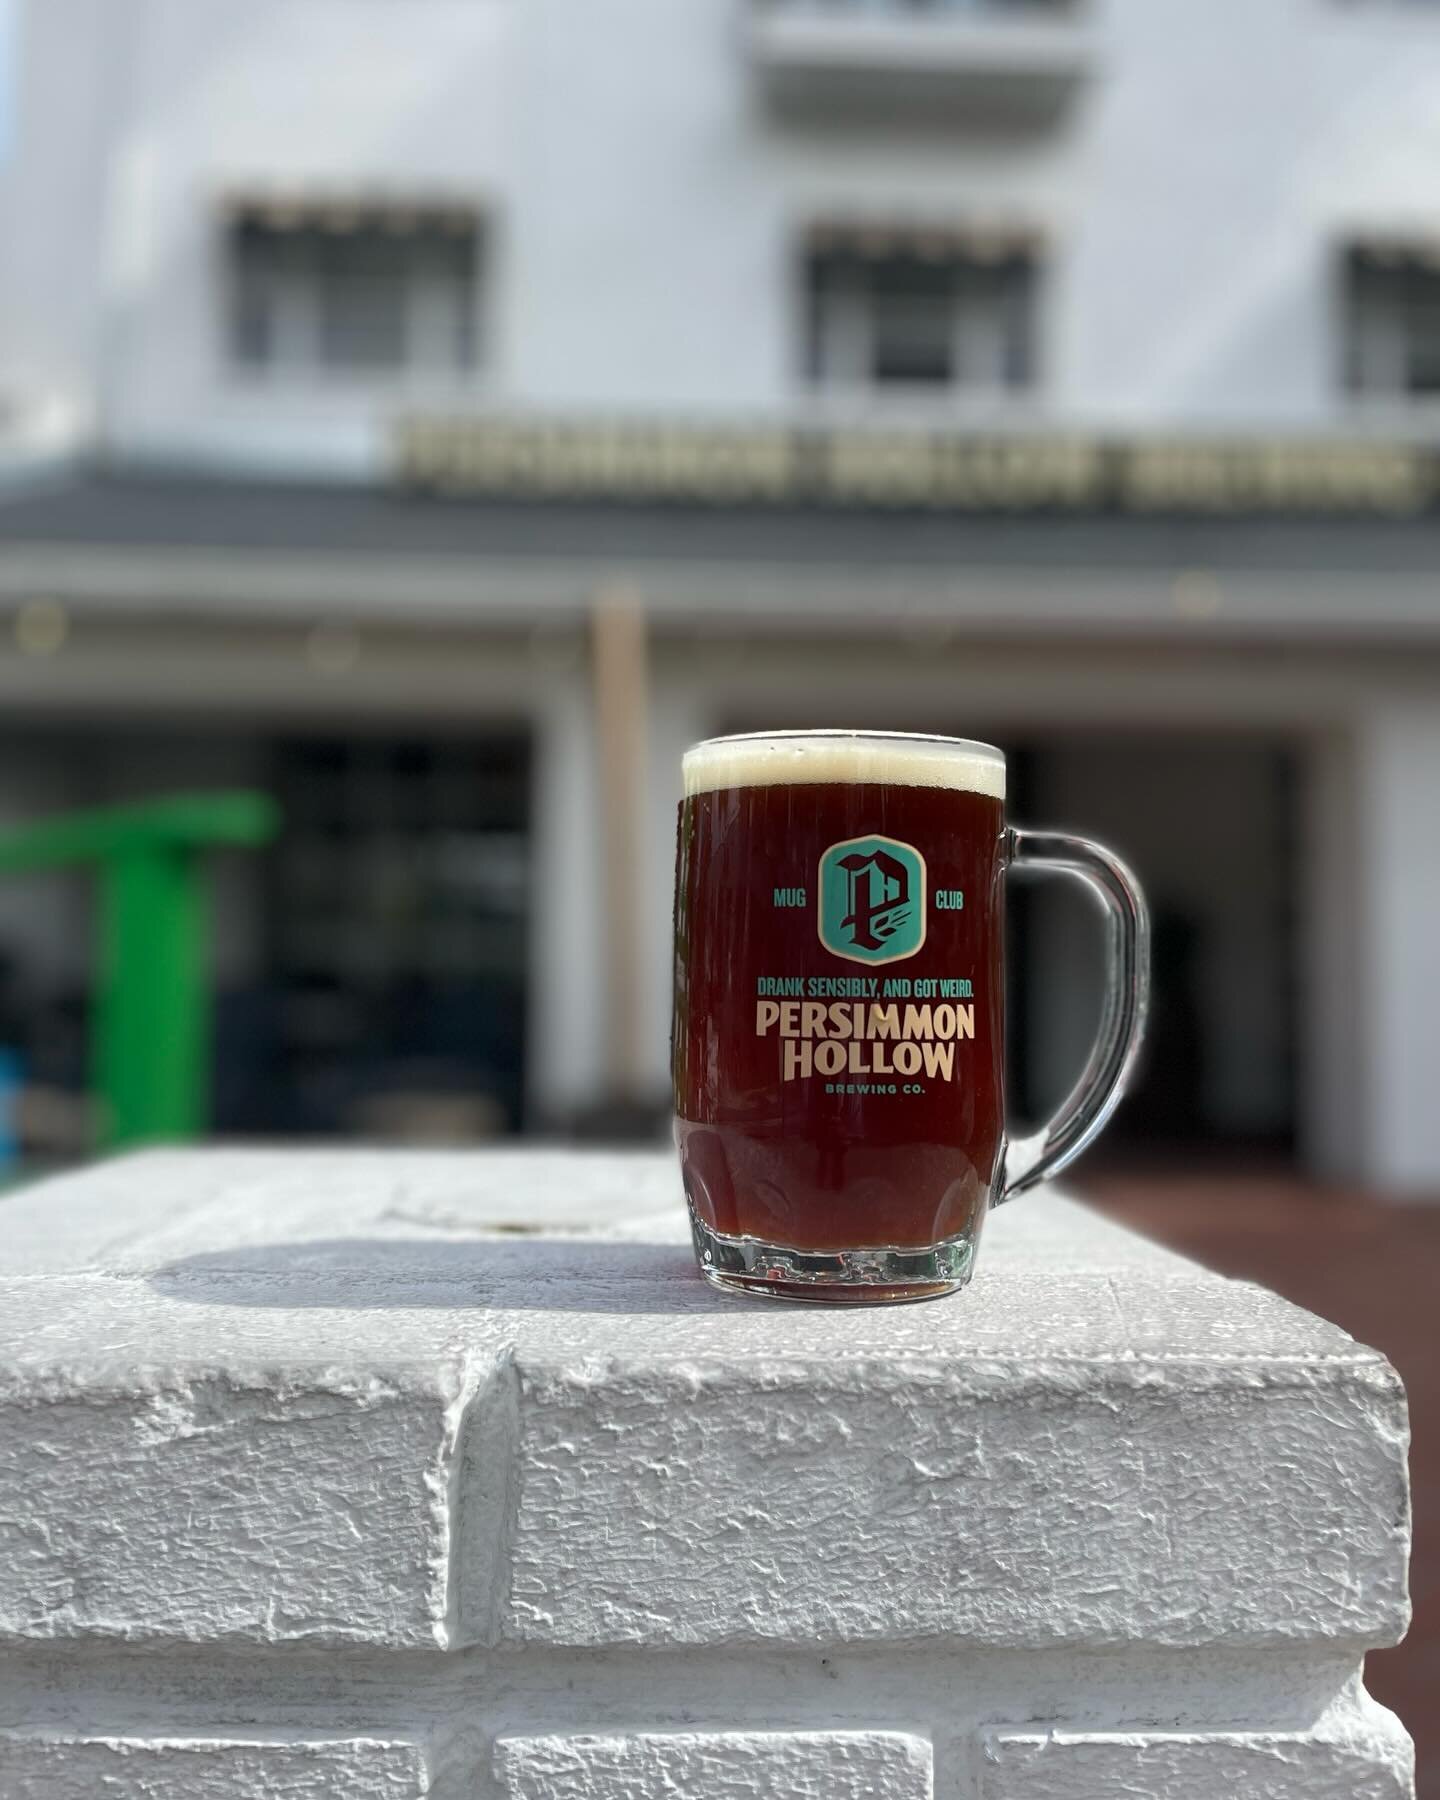 It&rsquo;s Mug Club Monday y&rsquo;all! 

Tom Hale Rye Ale (6.5%)

Aromas of caramel and toffee with a little toast. Flavors of sweet malt and caramel with a toasted and slightly nutty/spicy finish! 

Available for Mug Club Members today, and everyon